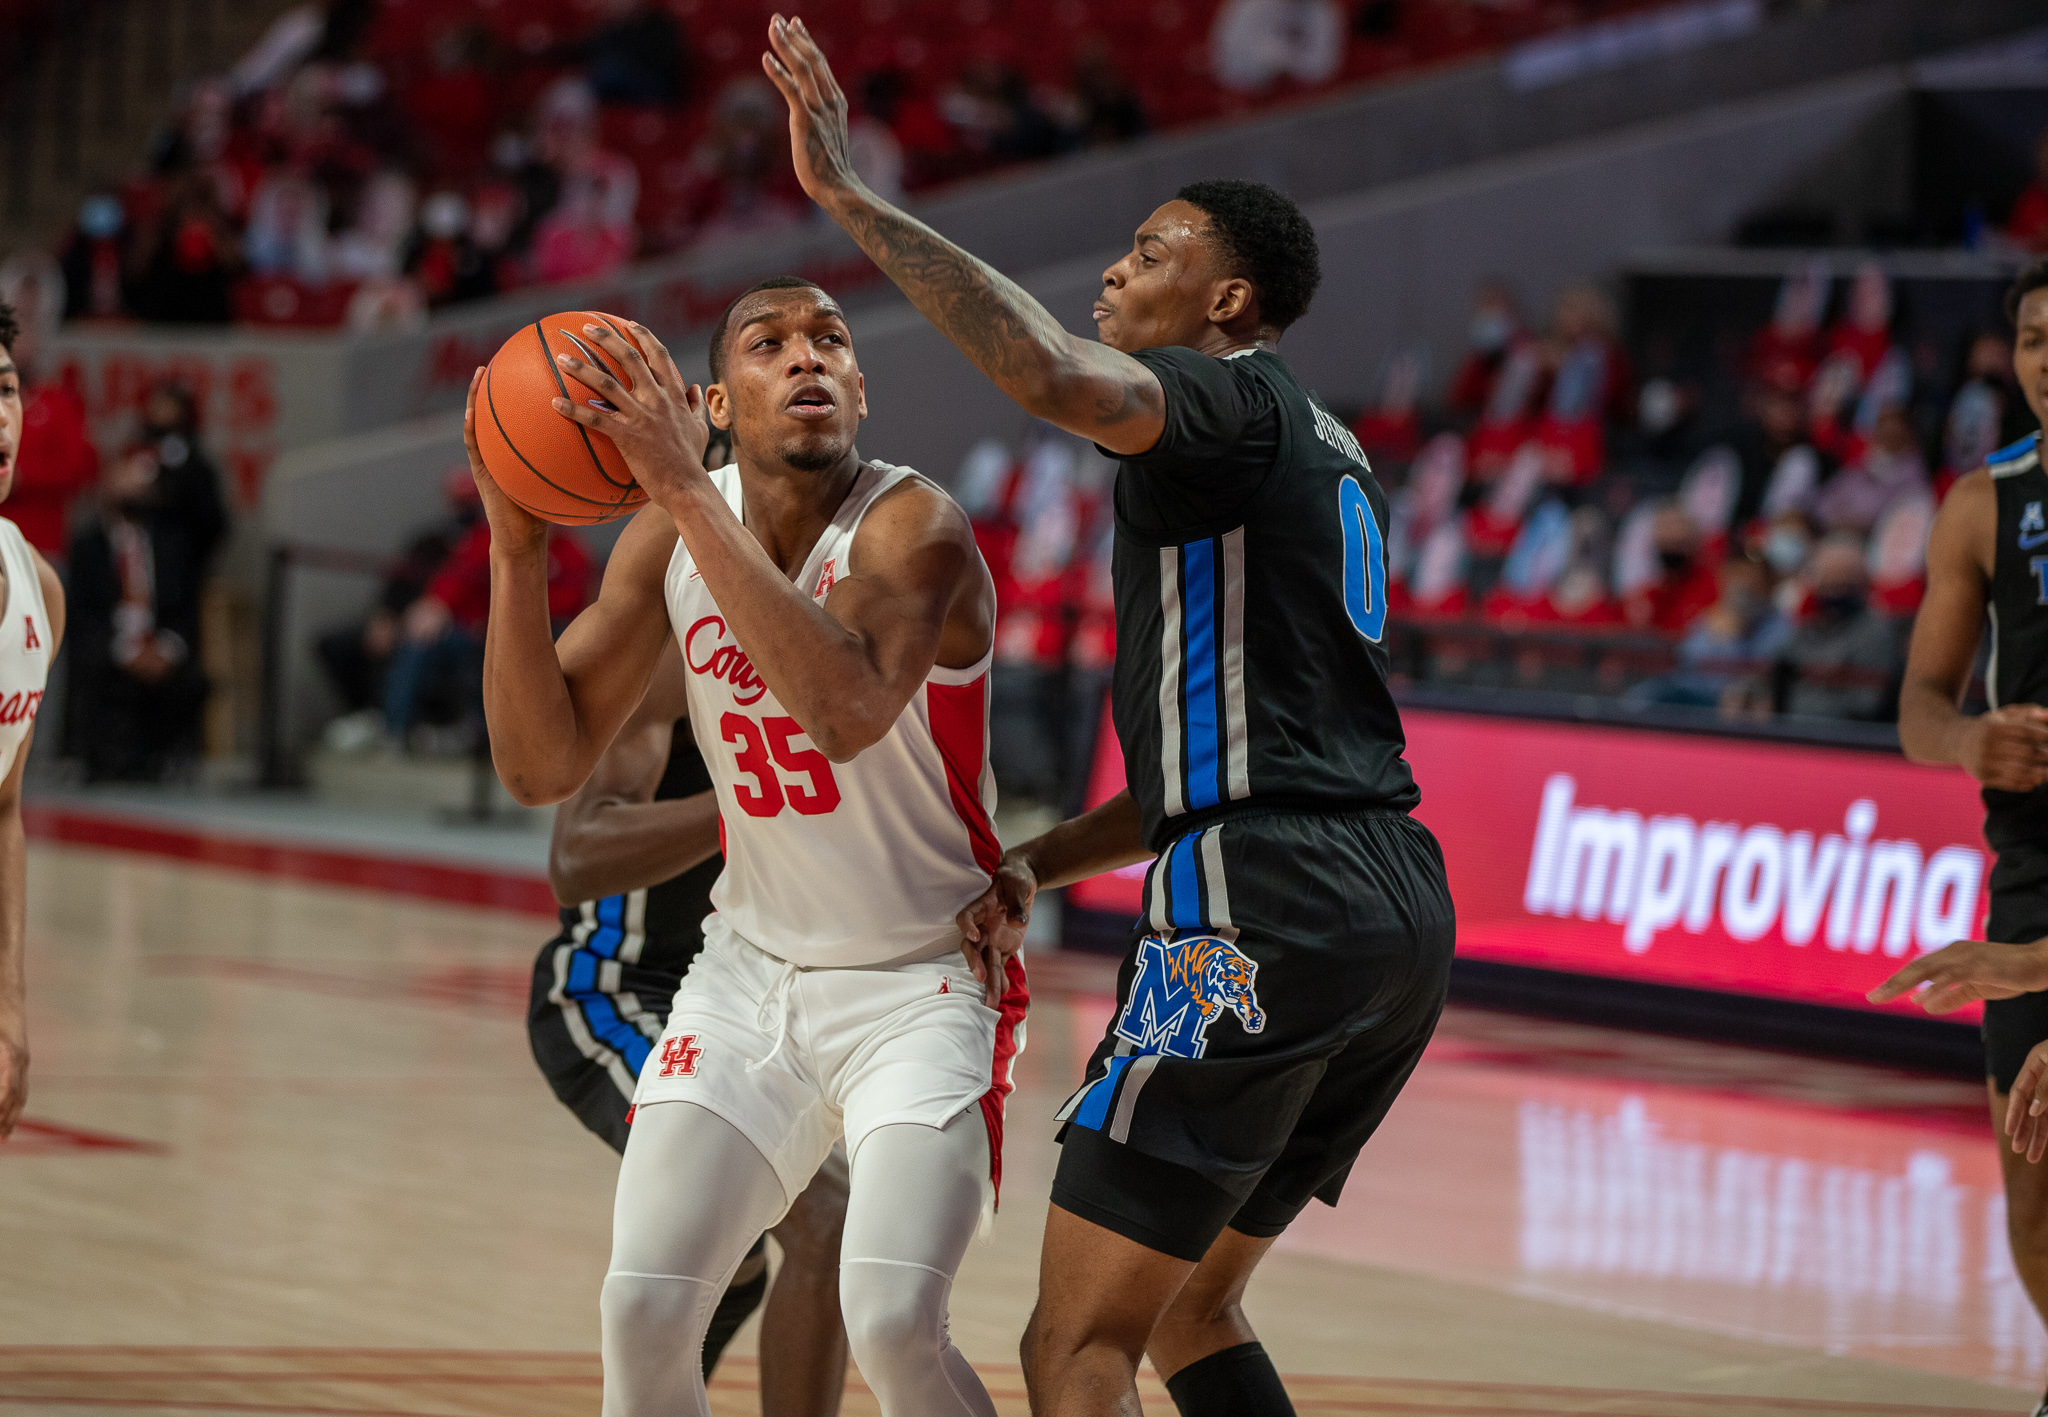 UH forward Fabian White Jr. goes up through the contact during last Sunday's game against Memphis at Fertitta Center. | Andy Yanez/The Cougar